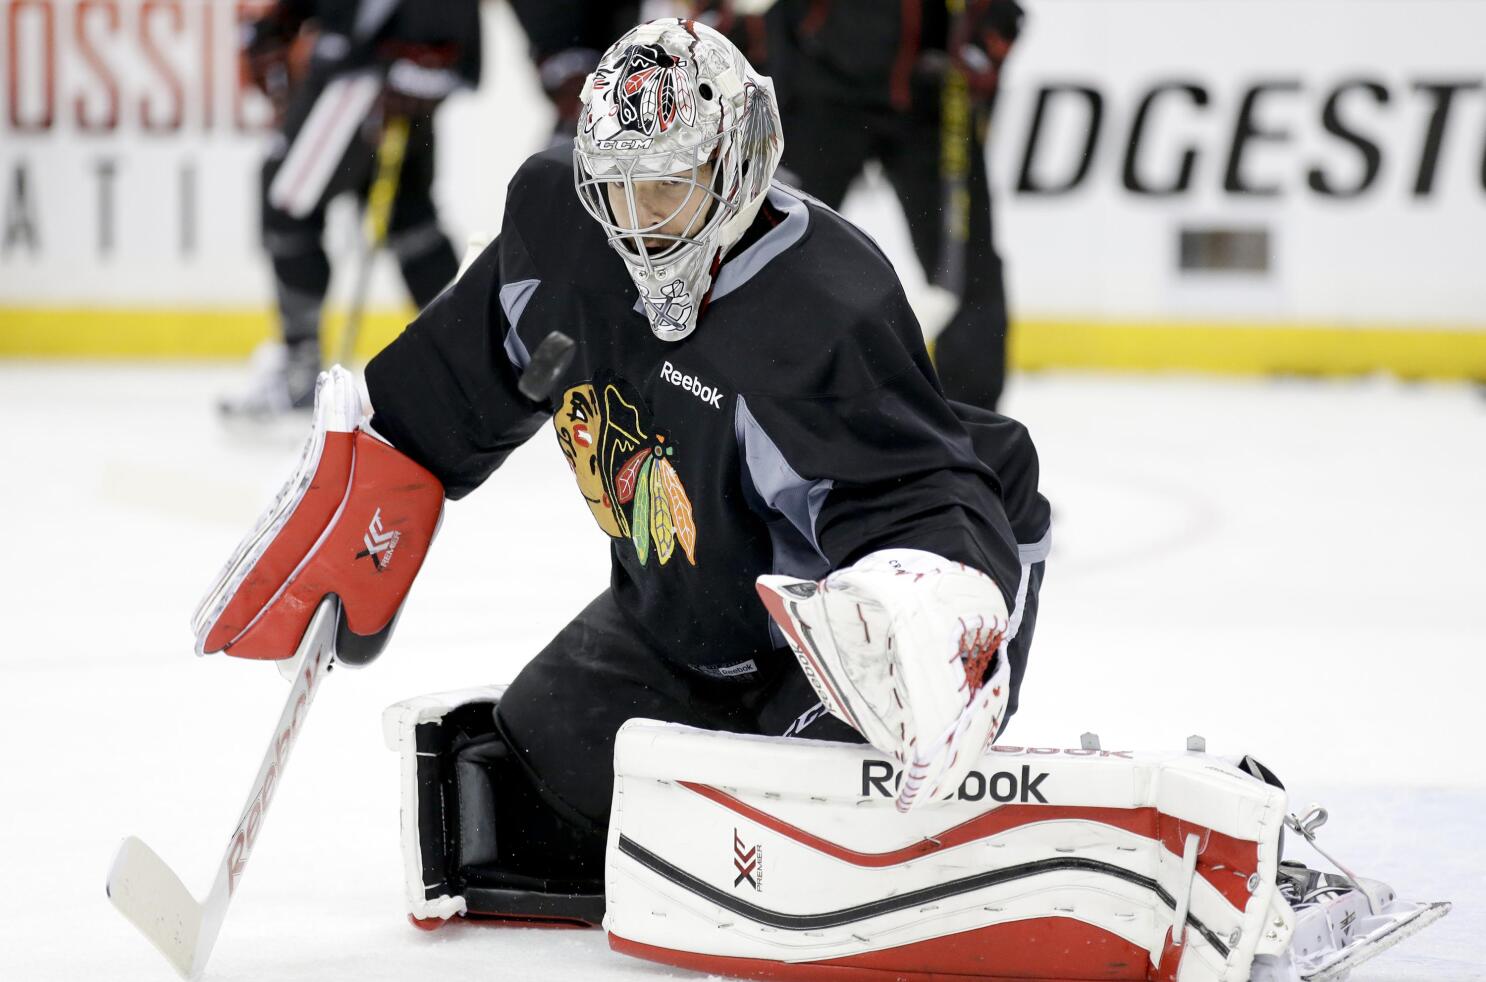 What dealing with COVID-19 was like for Blackhawks' Corey Crawford